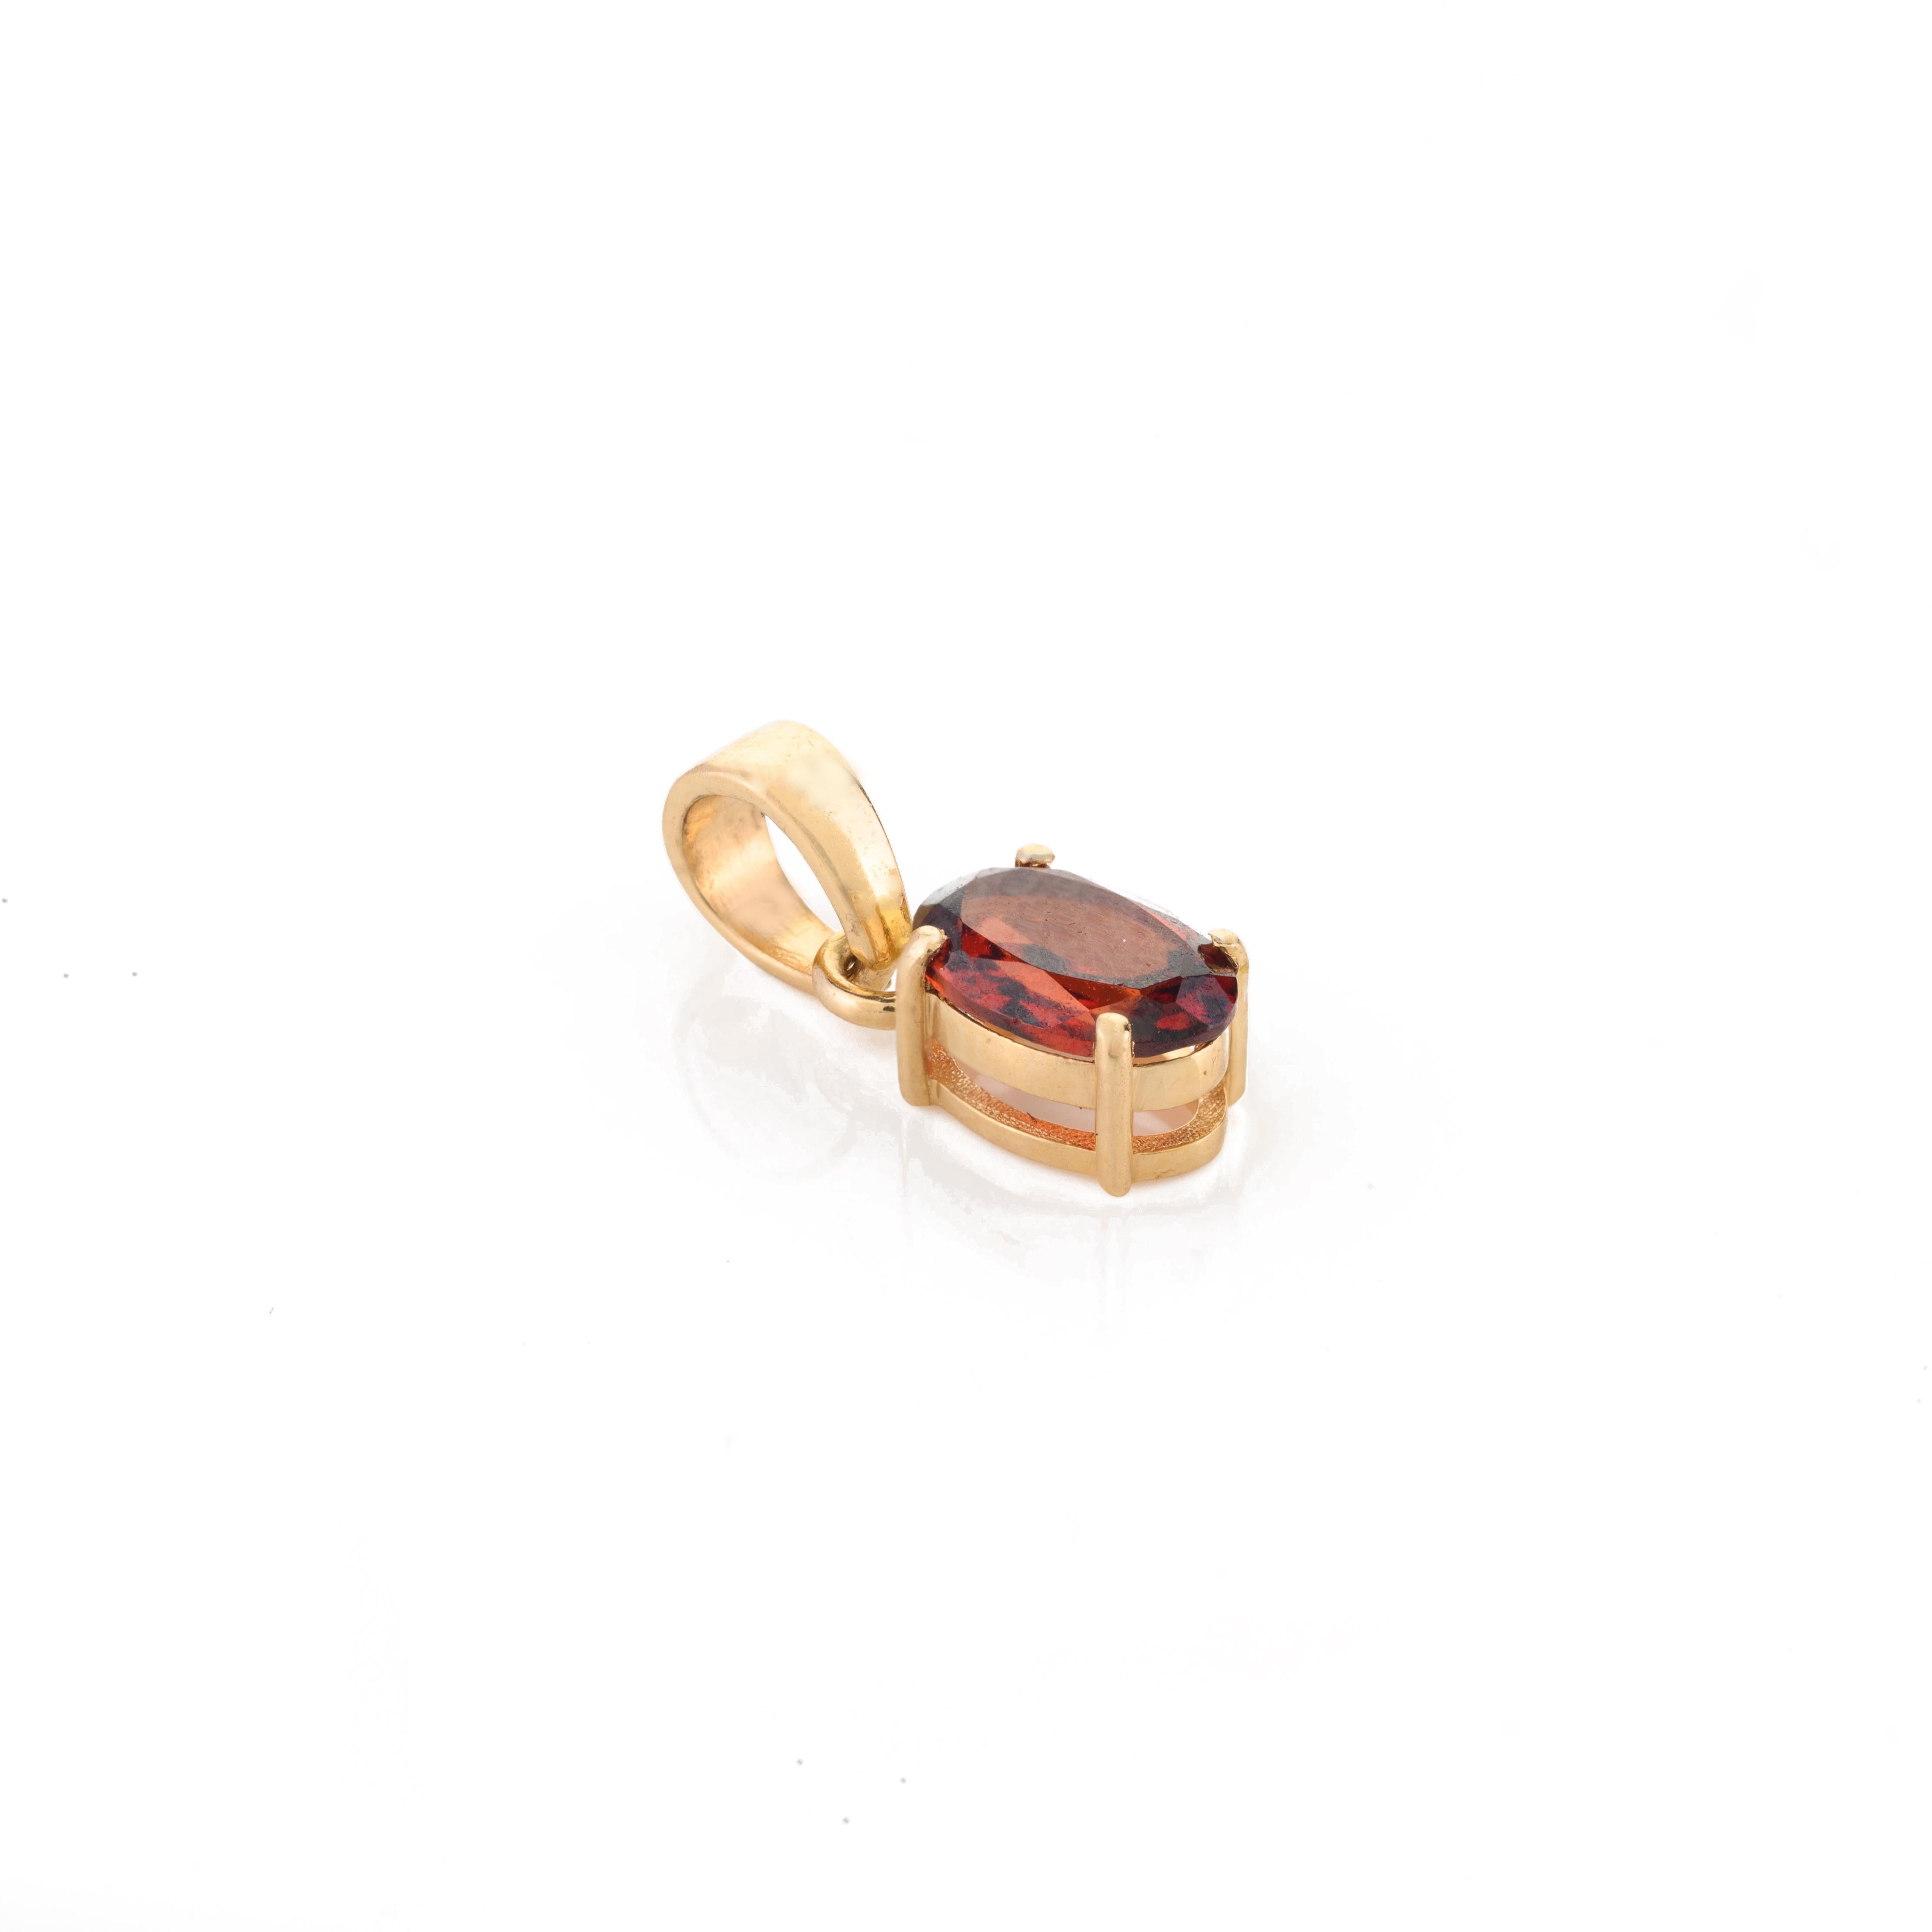 For Sale:  18k Solid Yellow Gold Handmade Garnet Ring, Earrings and Pendant Jewelry Set 17